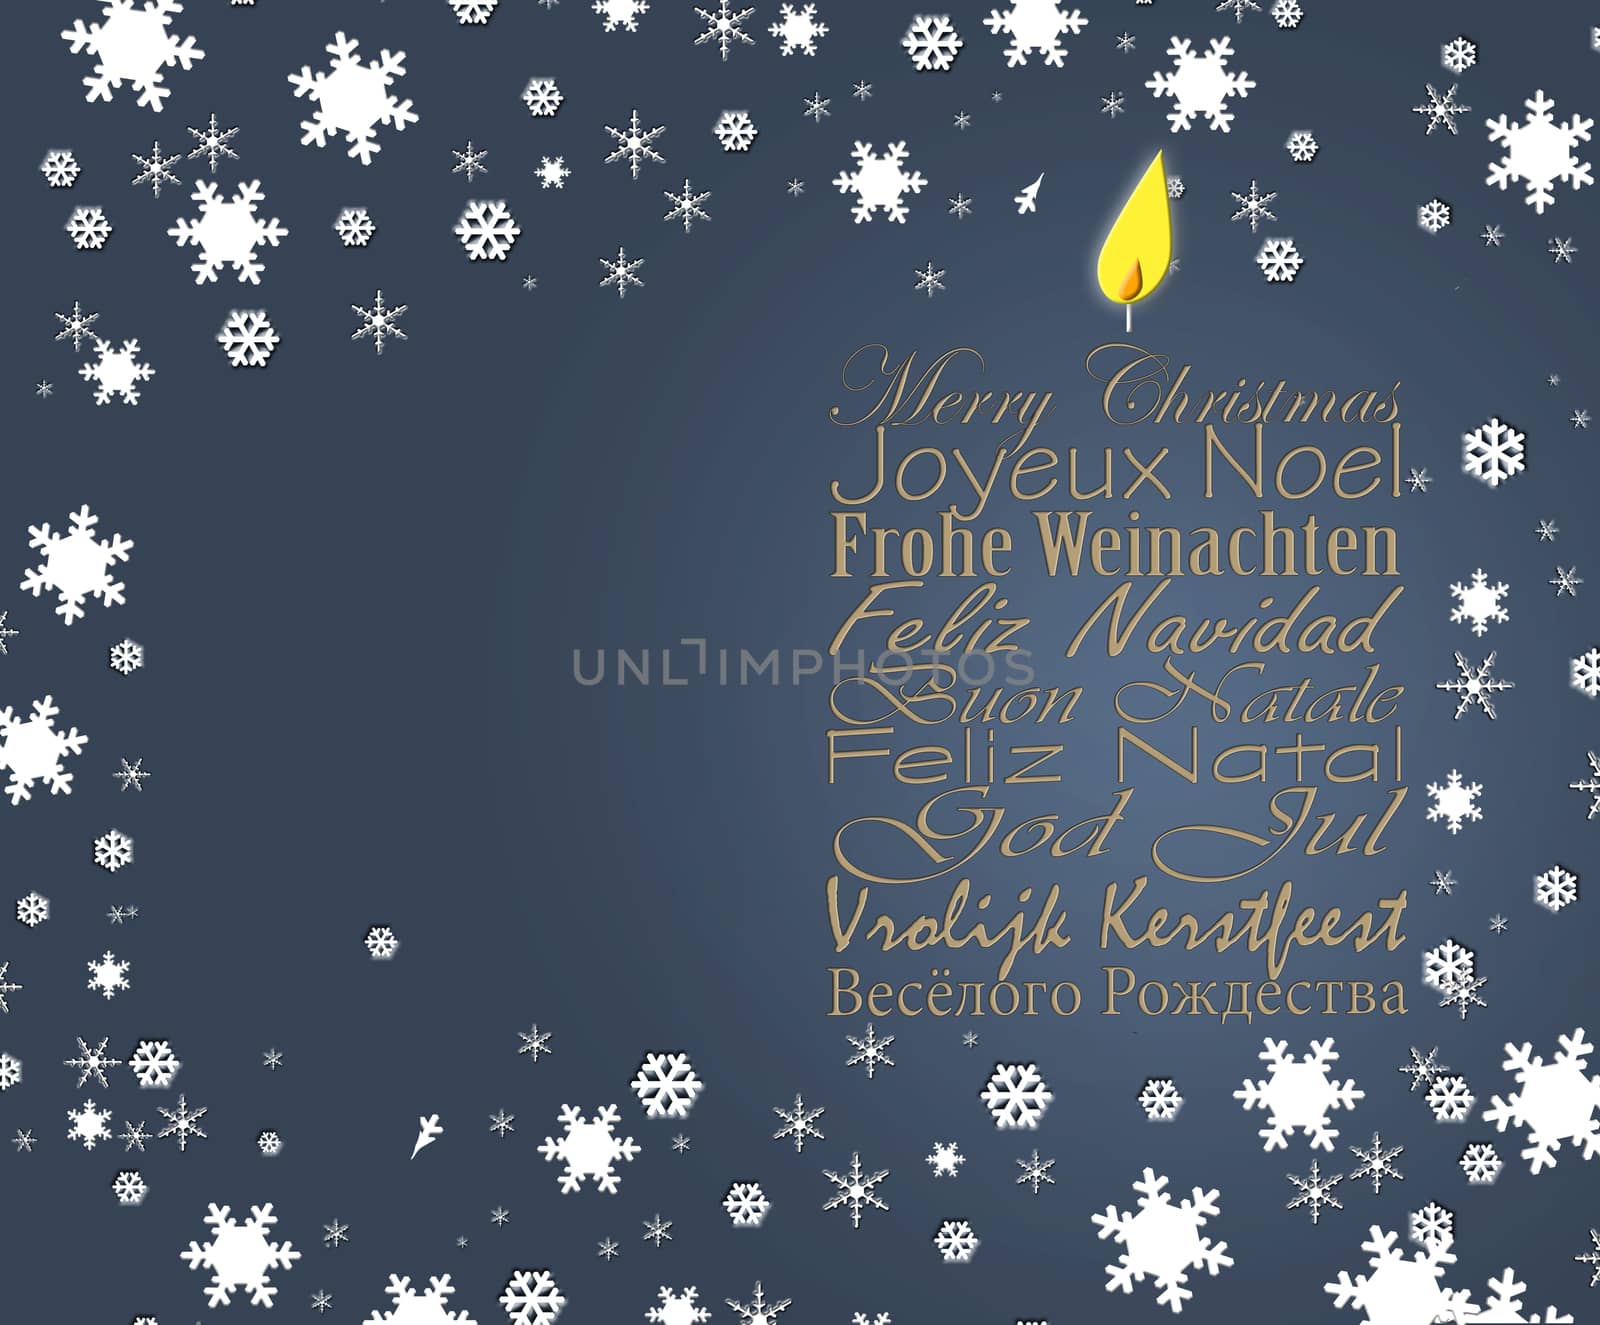 Merry Christmas wishes corporate bisuness card in European languages by NelliPolk